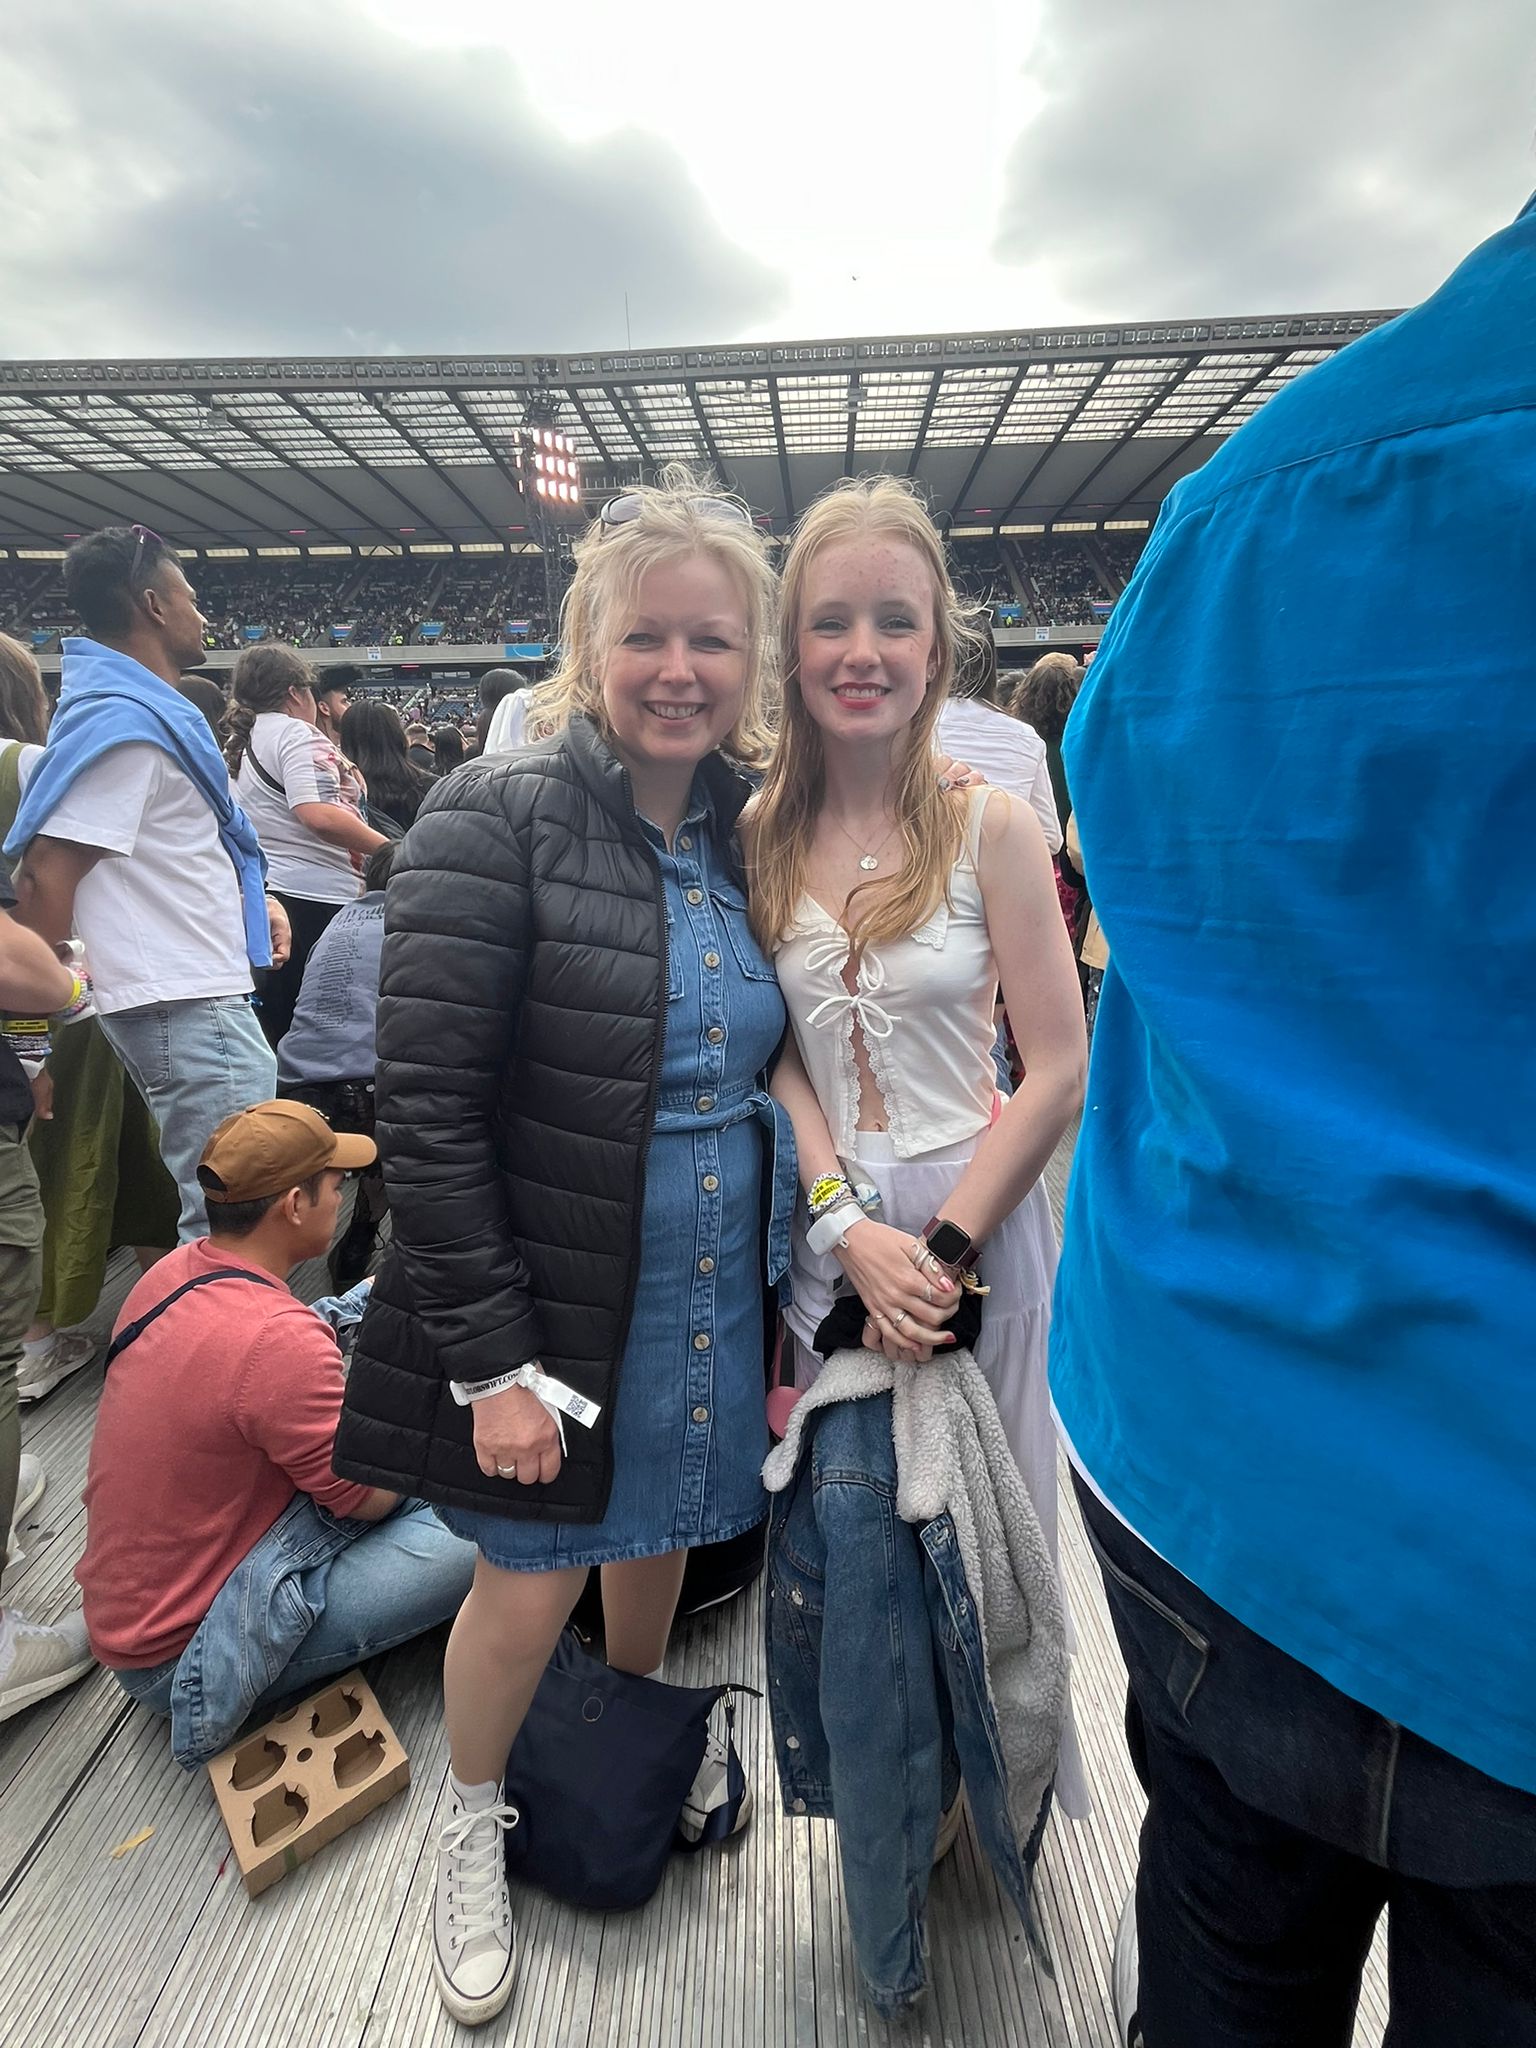 Edinburgh mum Pamela surprised her daughter with tickets after a year of trying to get them.